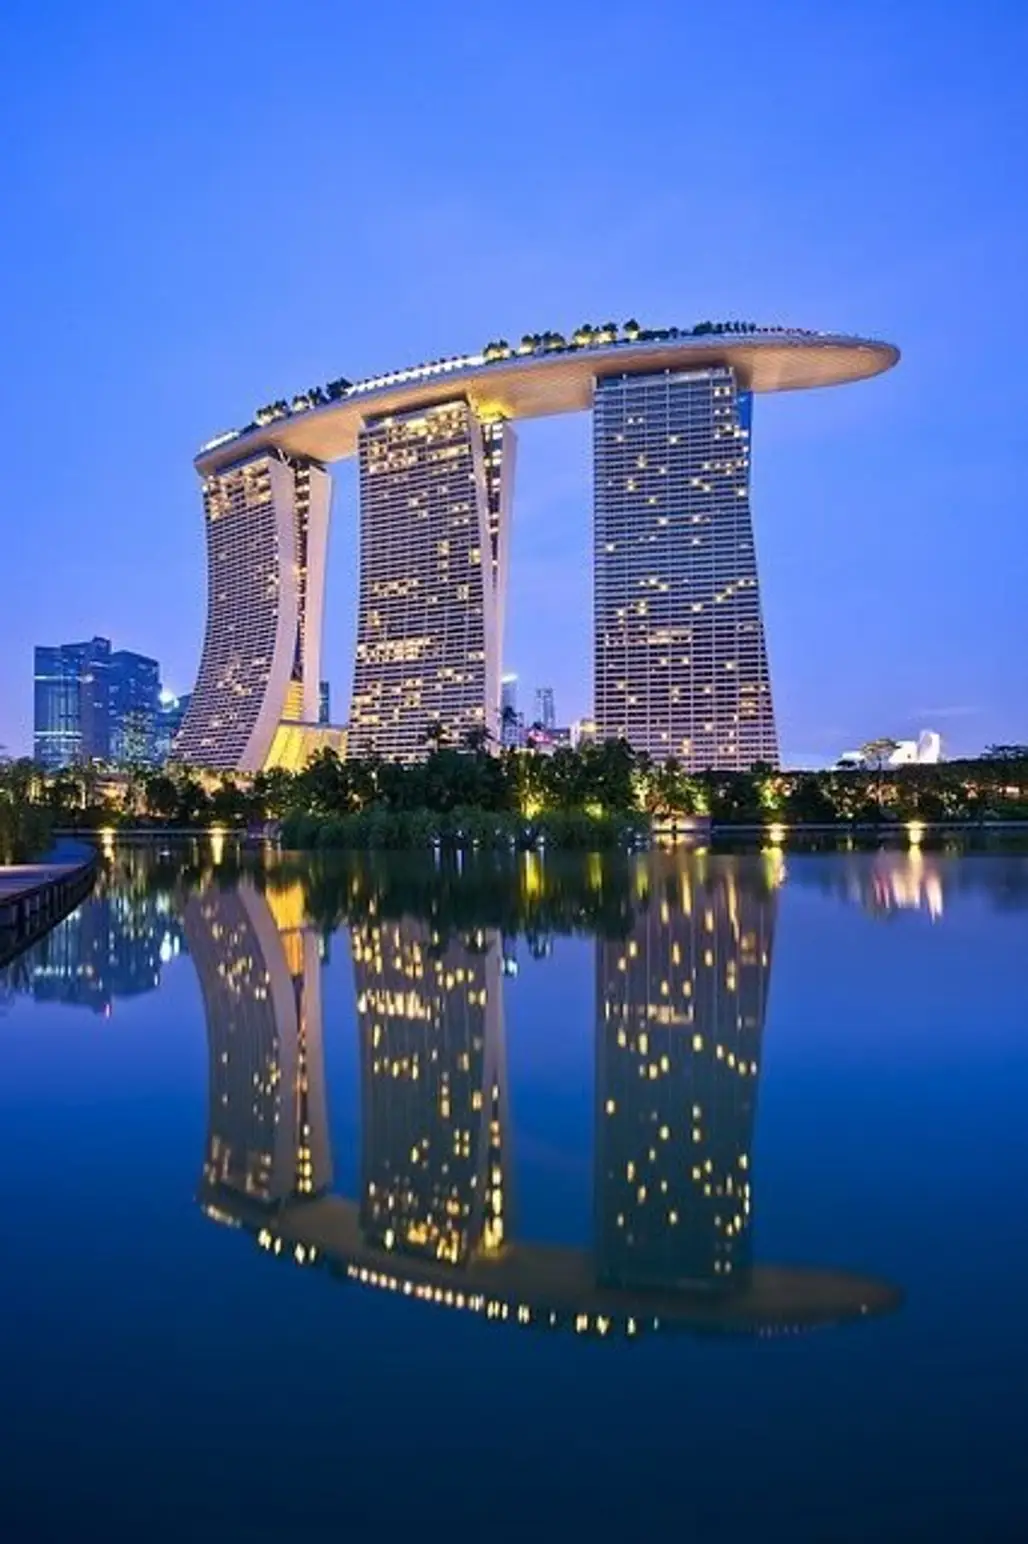 Marina Bay Sands in Singapore (a Different Angle than #16)